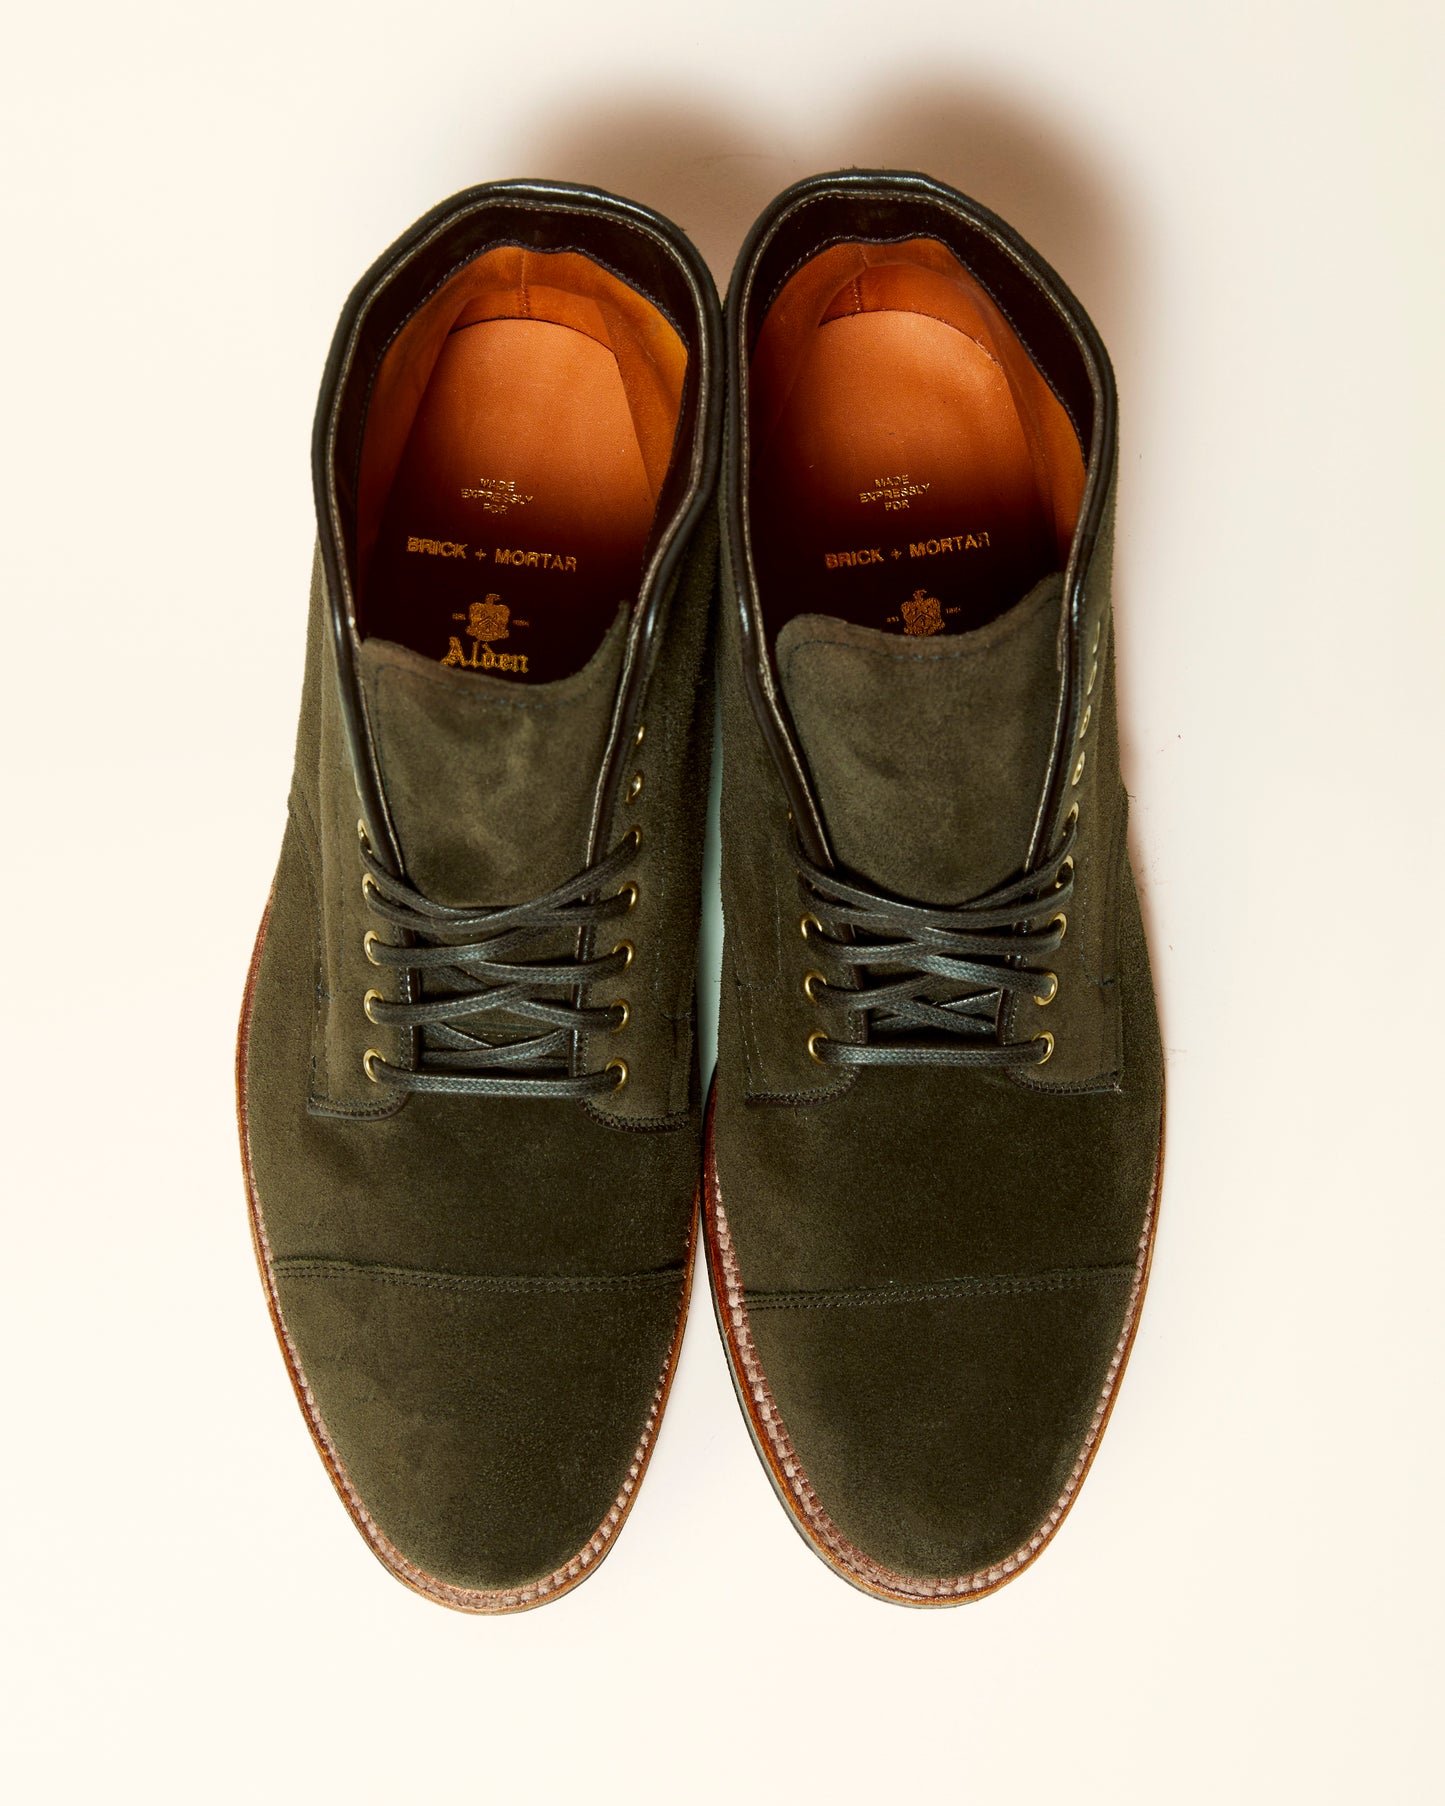 "Marvaments" Straight Tip Boot in Loden Green Suede, Grant Last